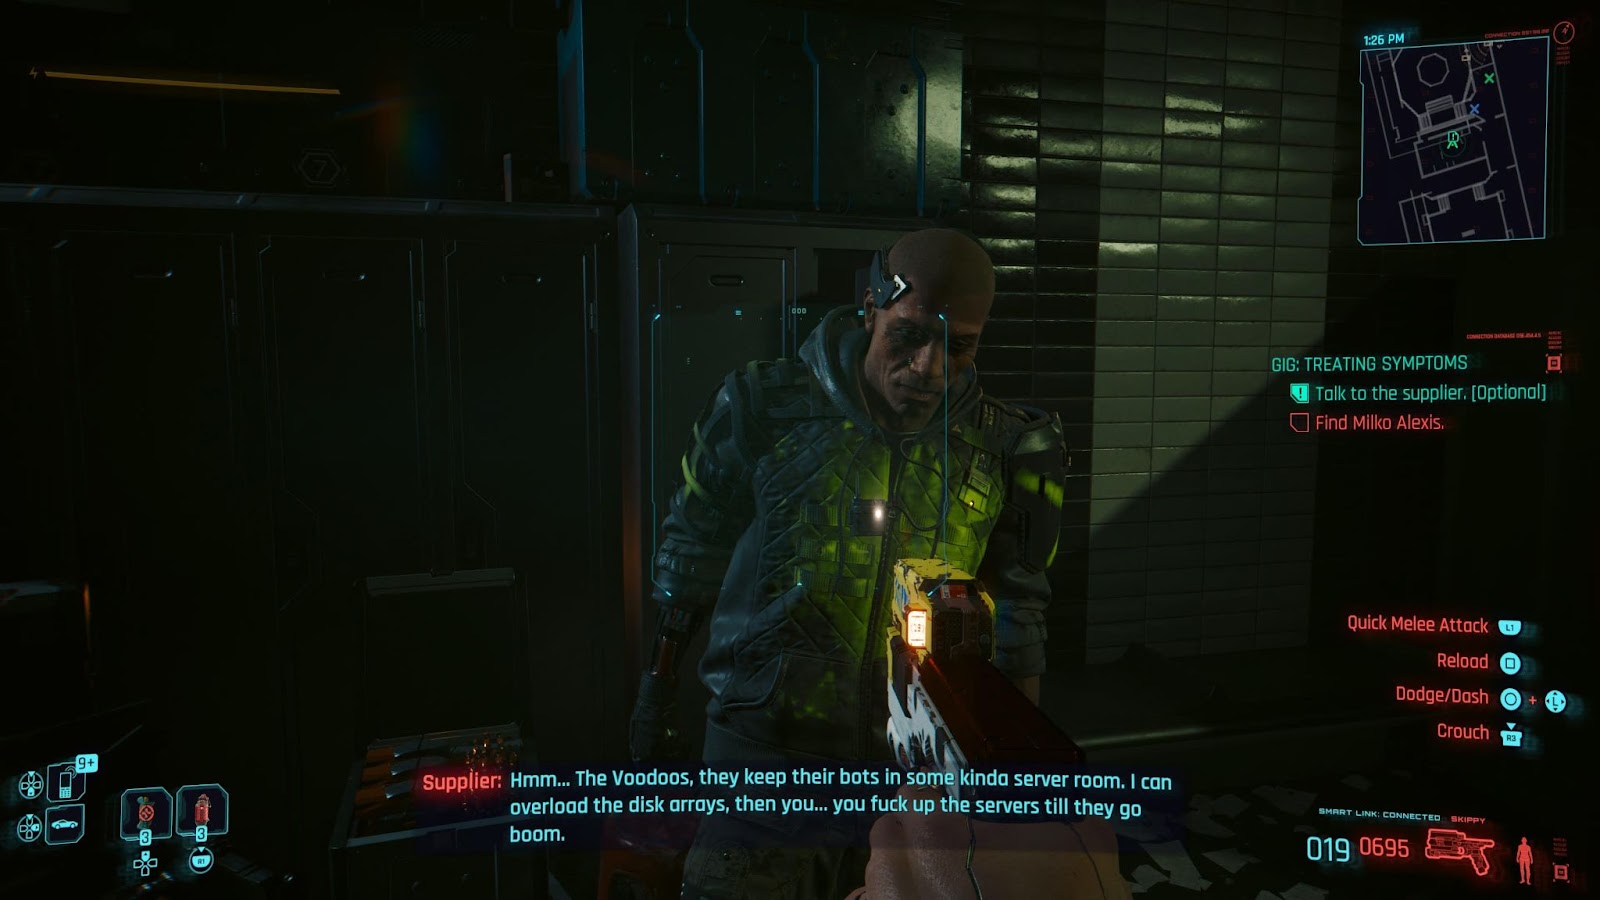 An in game screenshot of the supplier found in the Voodoo Boys base from the game Cyberpunk 2077. 